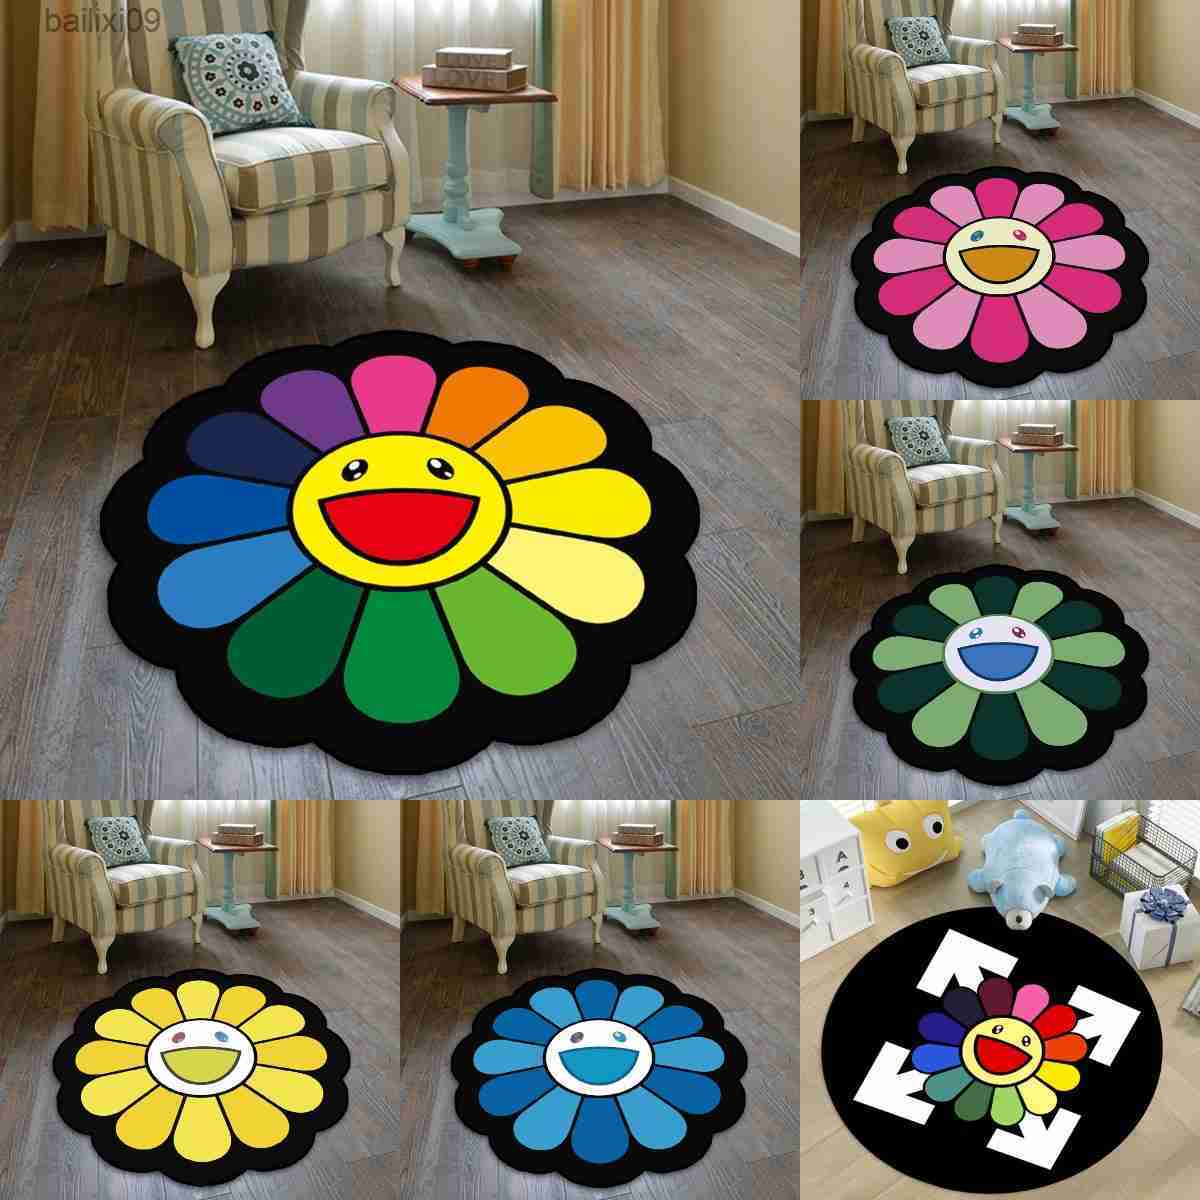 

Carpets Sun Flower Smiley Round Carpet for Bedroom Bedside Living Room Area Rug Lint-free Doormat Chair Mats Fashion Floor Mat Anti-skid T230519